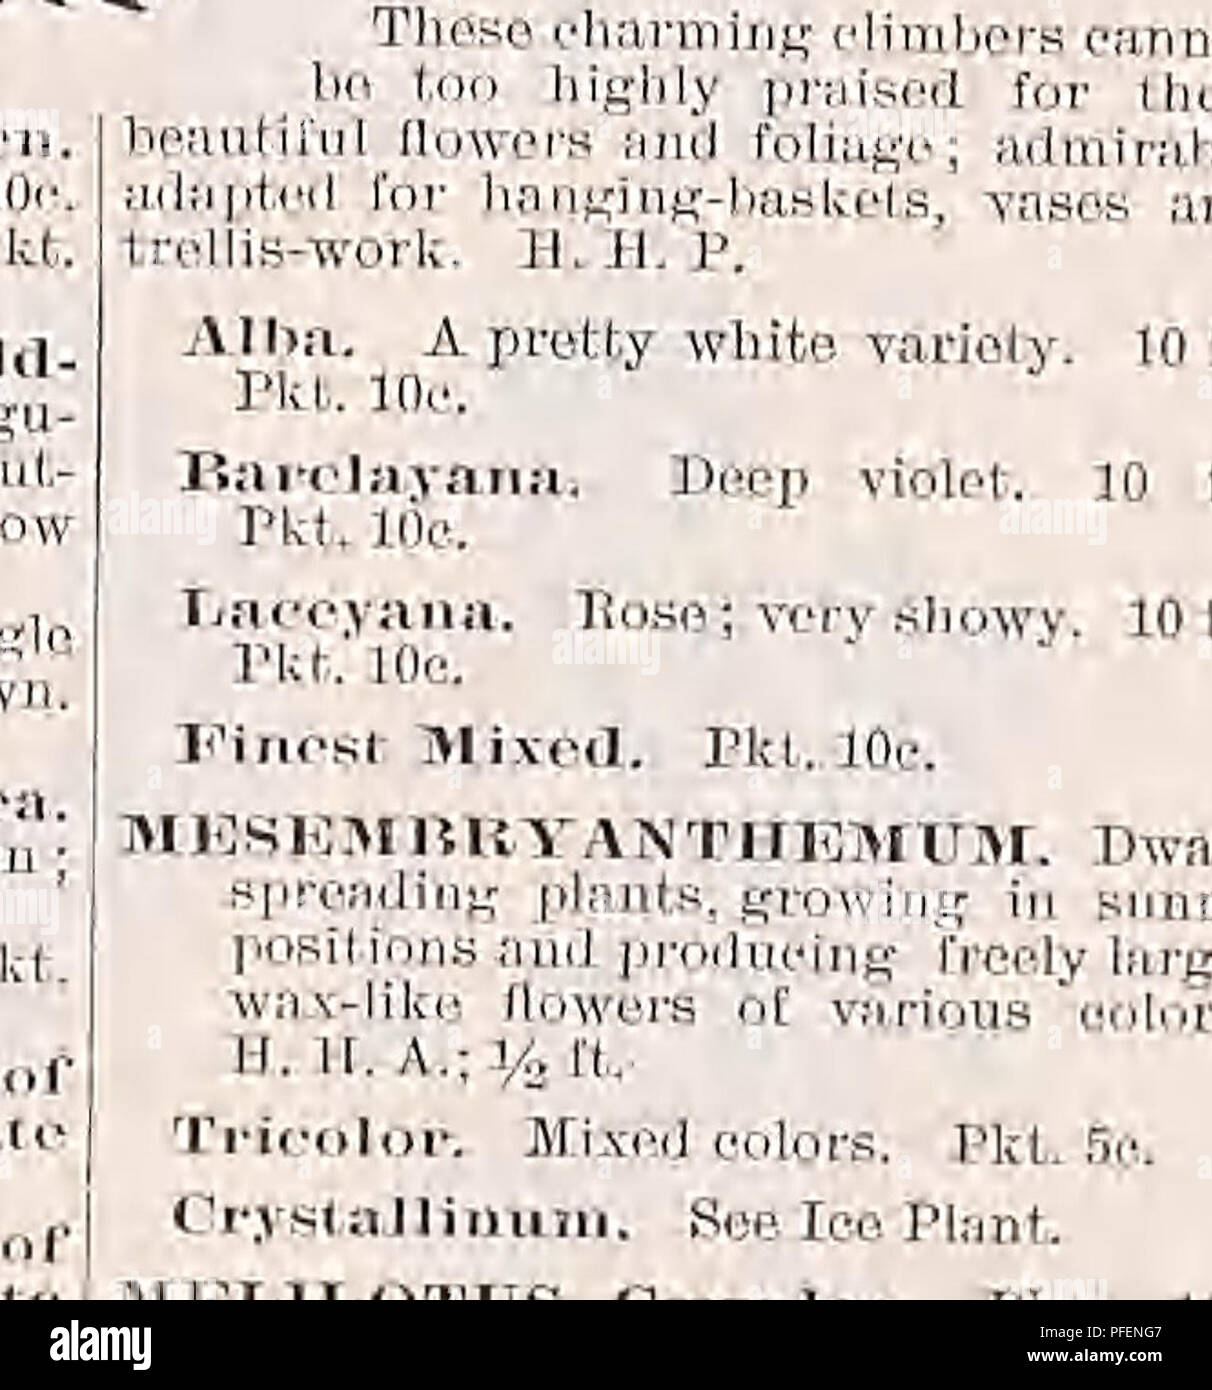 . Descriptive catalogue of vegetable, flower, and farm seeds. Nurseries (Horticulture); Nursery stock; Seeds; Bulbs (Plants); Gardening; Equipment and supplies; Bedding plants; Weeber &amp; Don. MIGNONETTE, MACHET MIN.Y Lobata, Haodsc s, half hardy climbing annual of rapid growth; hearing twin-like racemes of (lowers Which in the bud are orange-red, but open orange-yellow and soon turn to creamy white. 20 ft, Pkt. trie. MOMJCEl/LA Spino.sa. A splendid shell-flower, rose. 7 ft. If. 1'. Pkt. 25c. MOMOftDIOA. Trailing plants, with curious and ornamental foliage and remarkable fruit. H. If. A. lSa Stock Photo